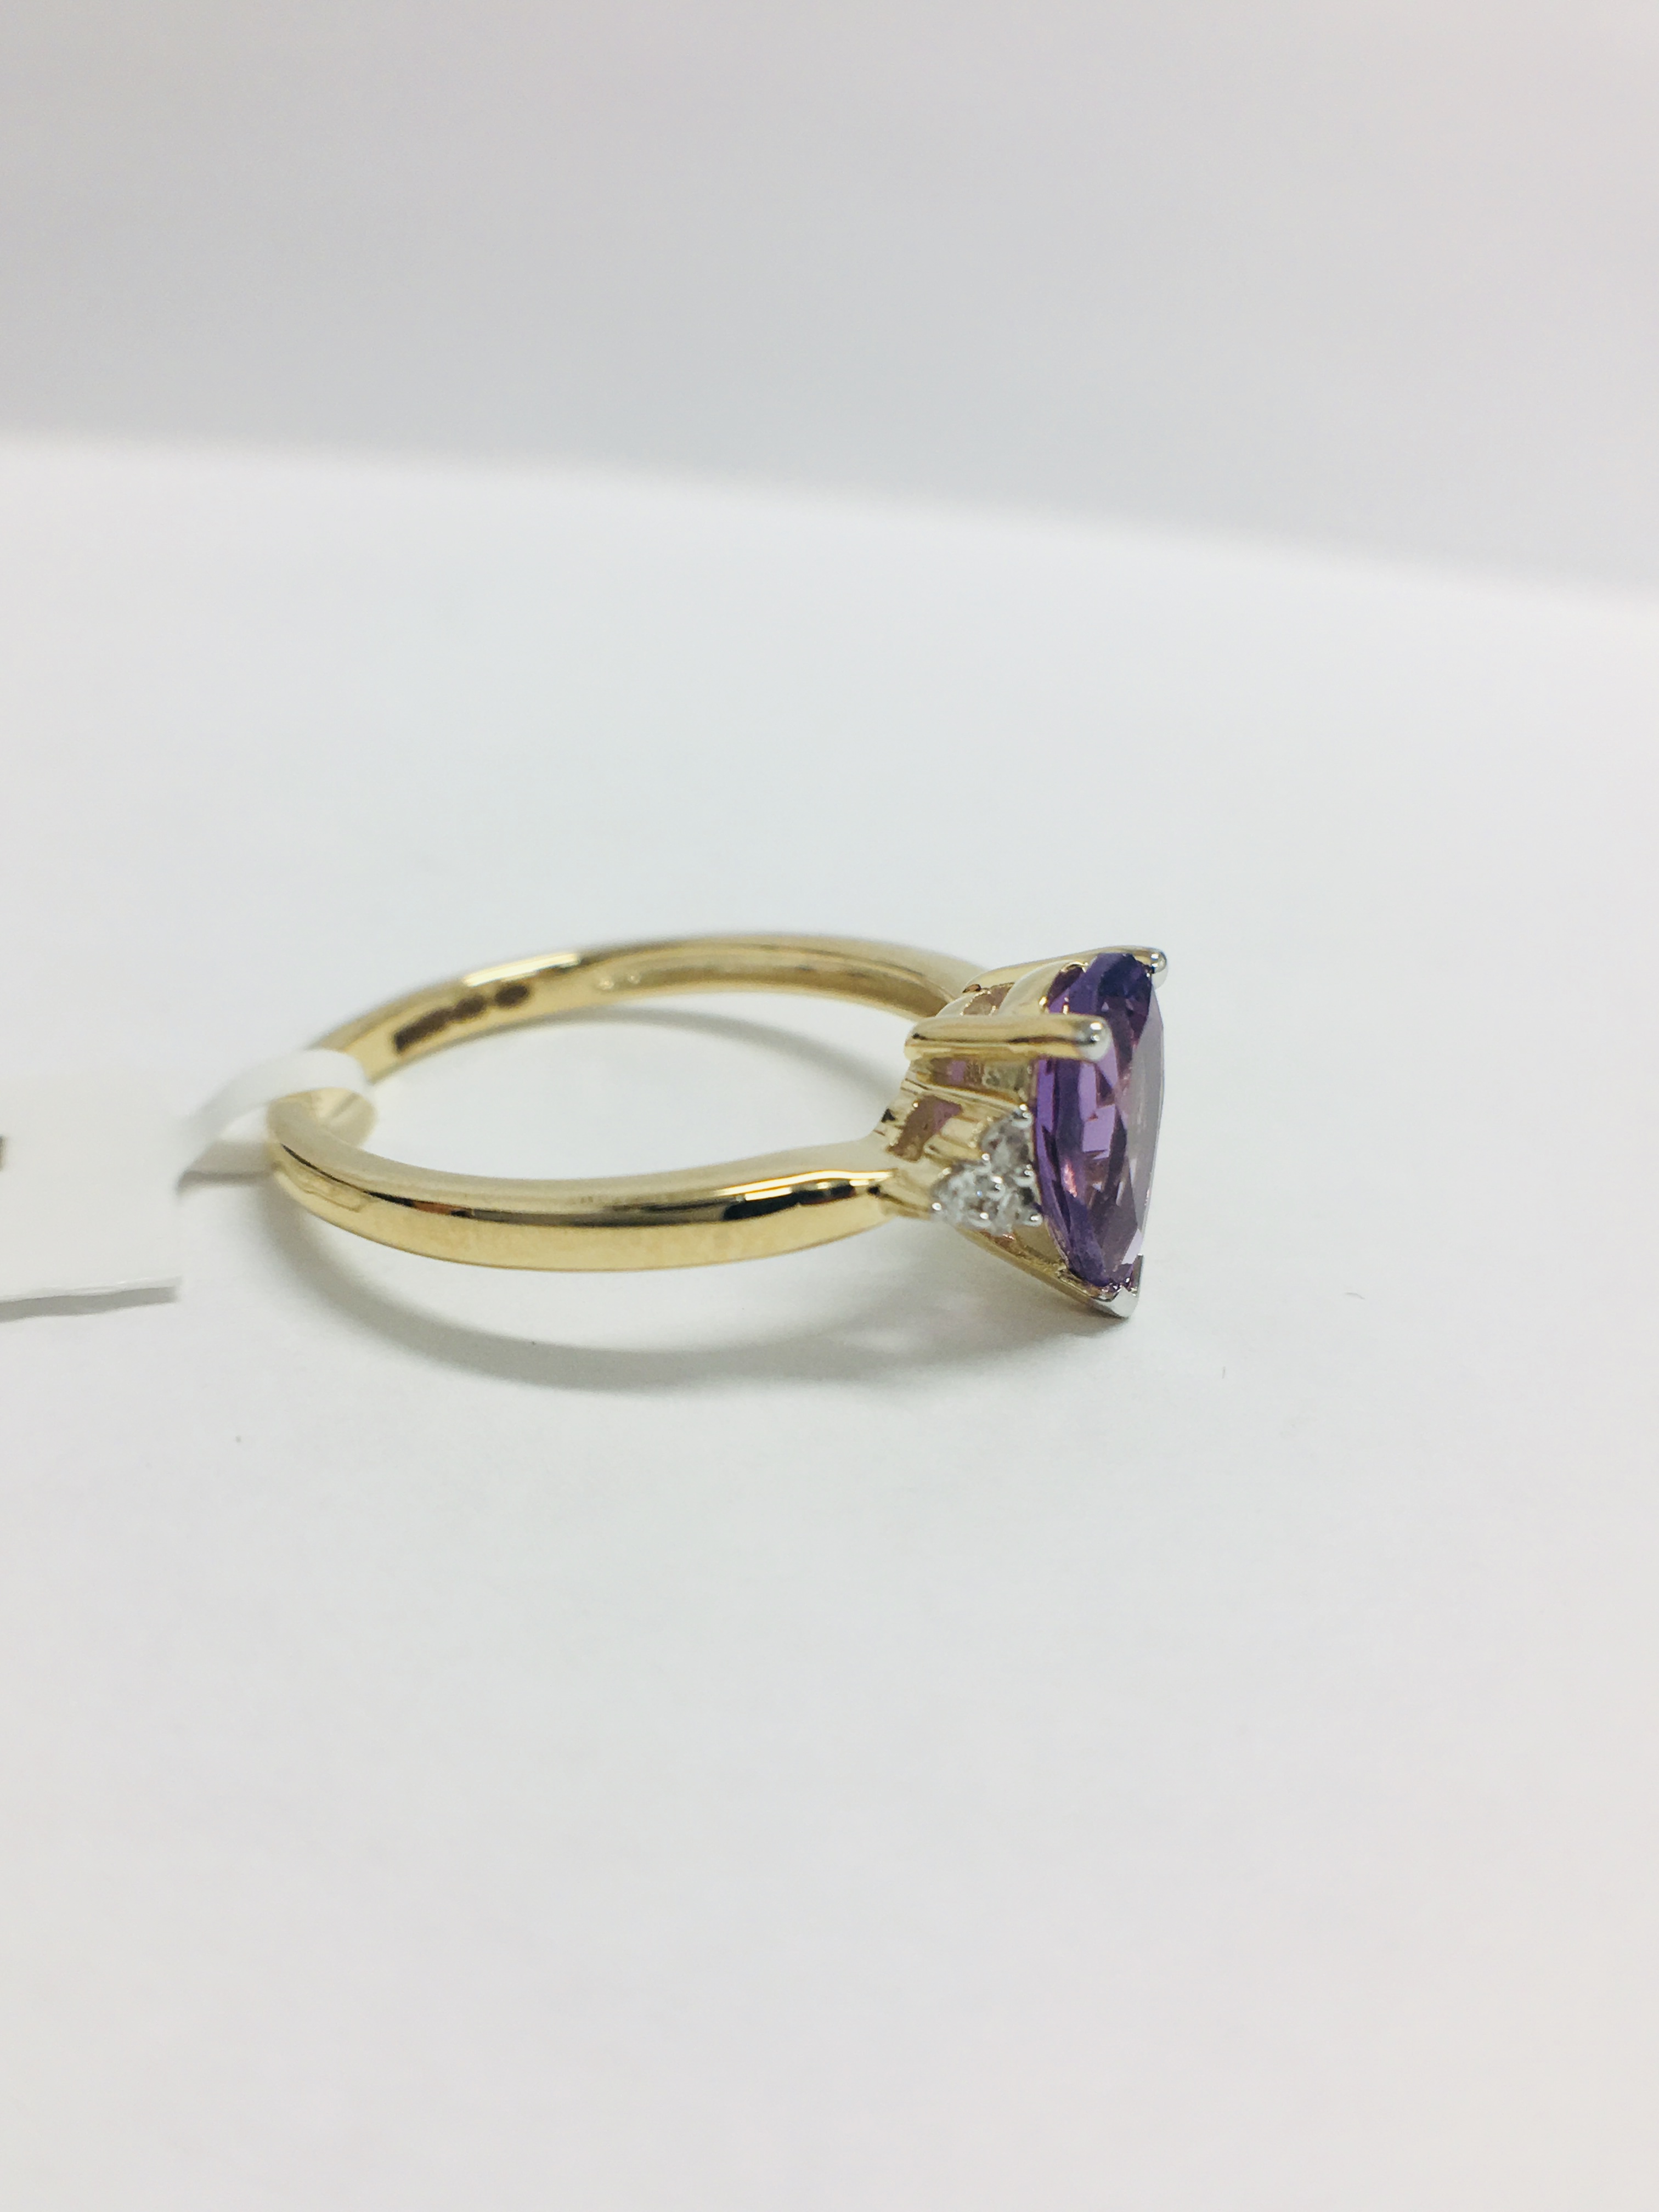 9Ct Yellow Gold Amethyst Diamond Navette Style Dress Ring, - Image 7 of 10